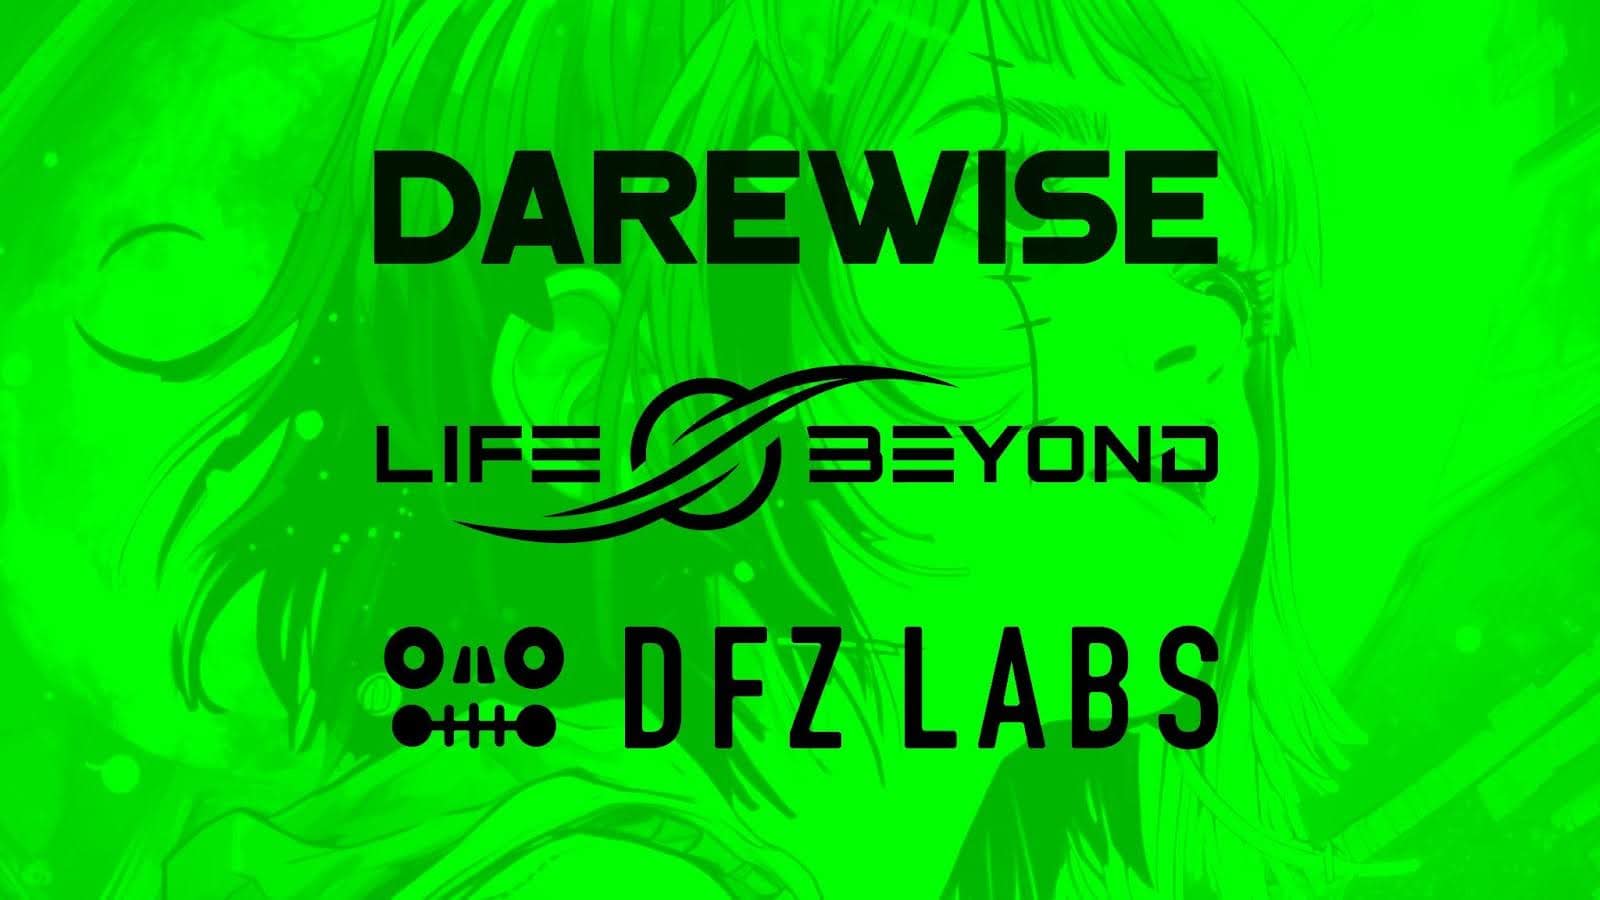 lifebyondareweise animoca brands 28 January 2024 - Darewise Entertainment (“Darewise”), a subsidiary of Animoca Brands and the visionary force behind the Life Beyond gaming destination, announced today a strategic partnership with DFZ Labs, creator of the world-renowned Web3 brand Deadfellaz. 